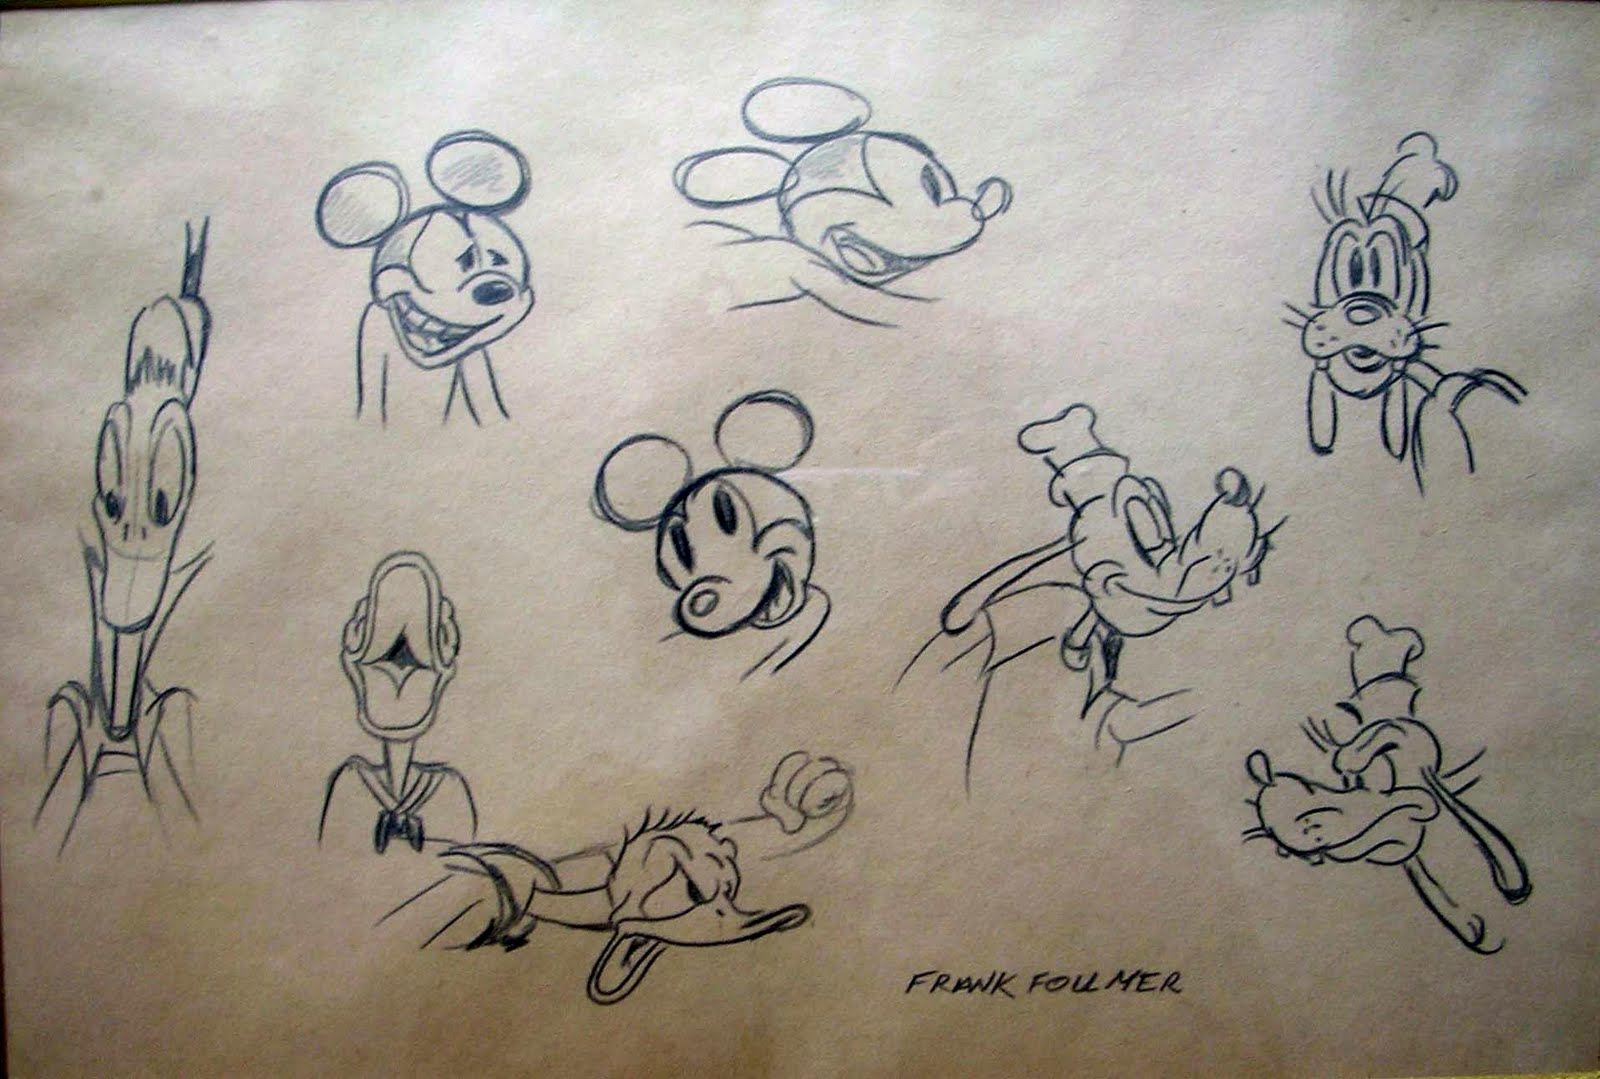 Words and Pictures: Frank Follmer's Naughty Disney